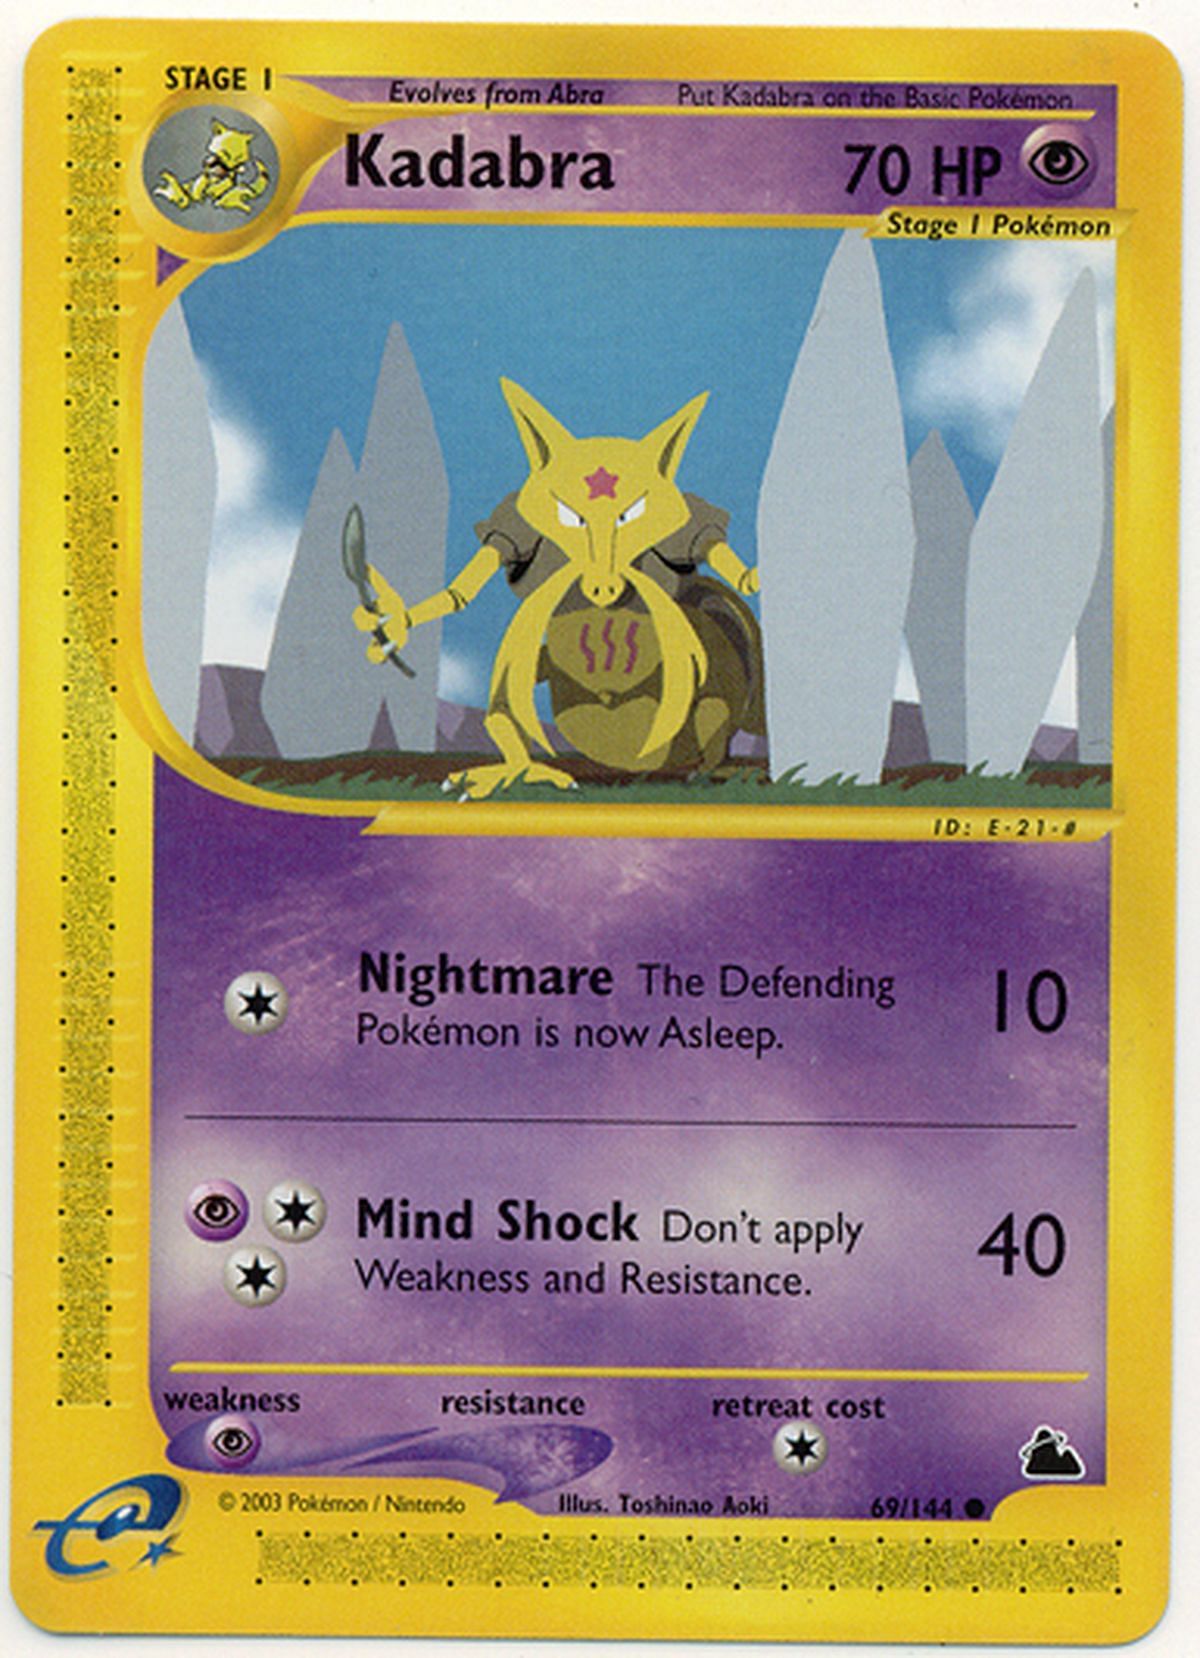 This was its last ever card before its return (Image via The Pokemon Company)